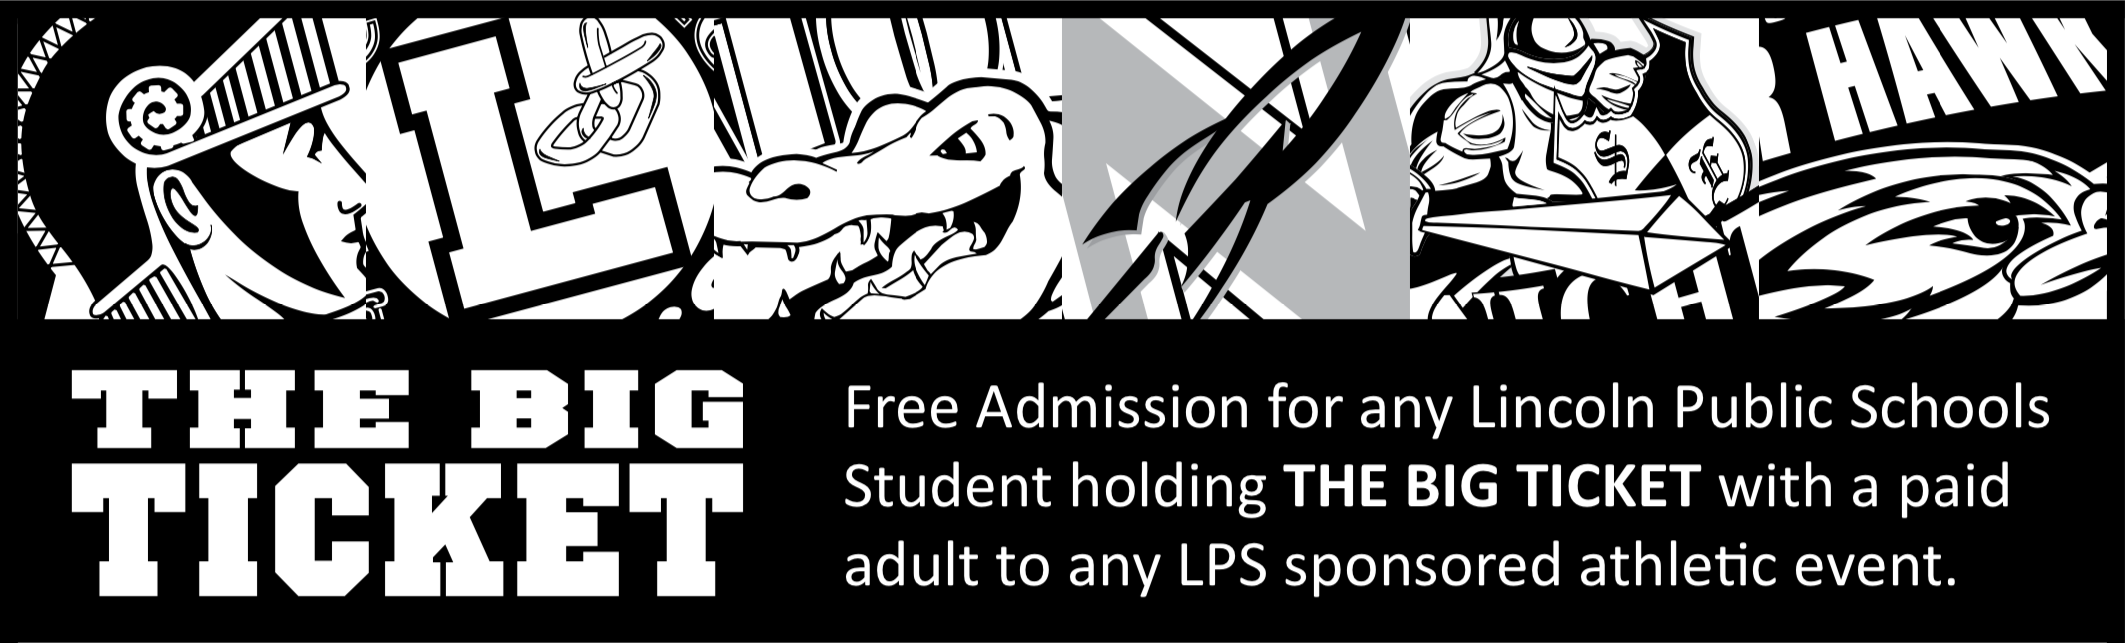 The Big Ticket: Free Admission for any Lincoln Public Schools Student holding THE BIG TICKET with a paid adult to any LPS sponsored athletic event.